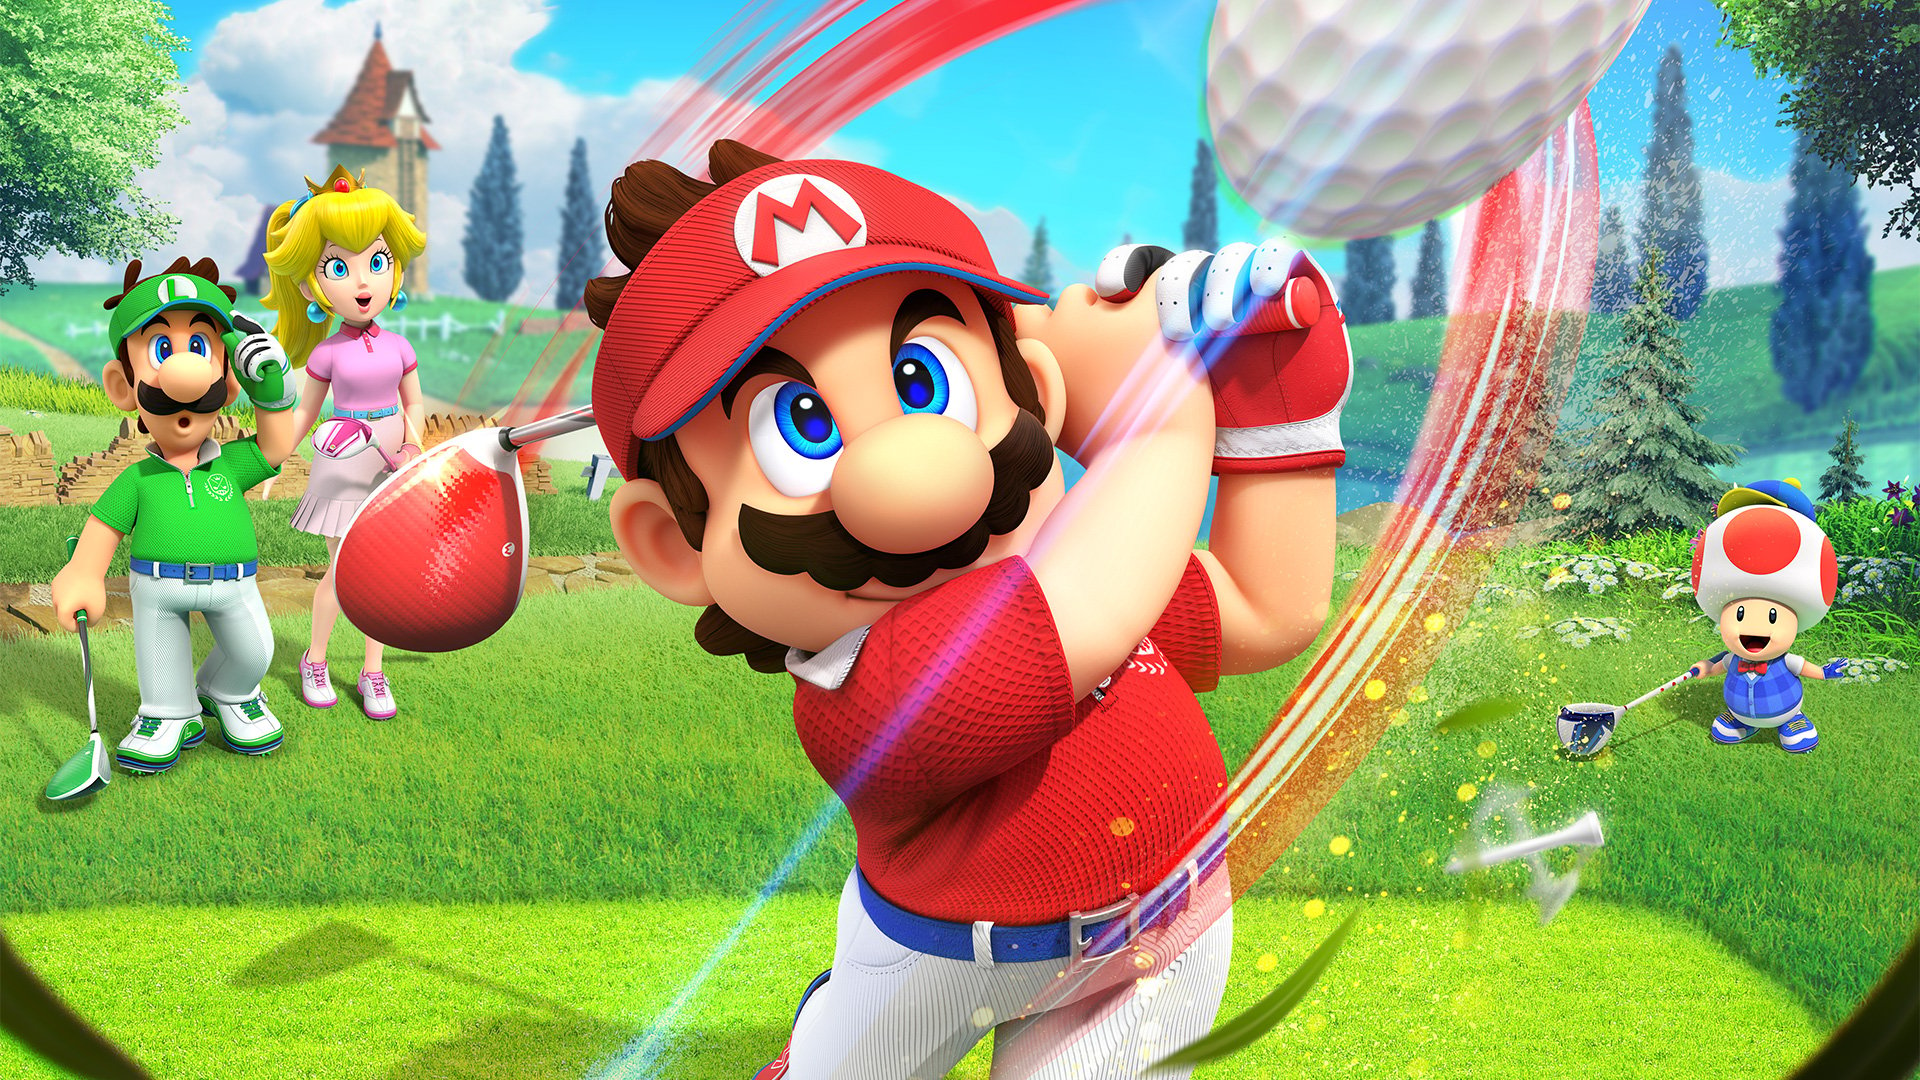 Mario Golf Super Rush gets its last free DLC with new characters, courses  and modes